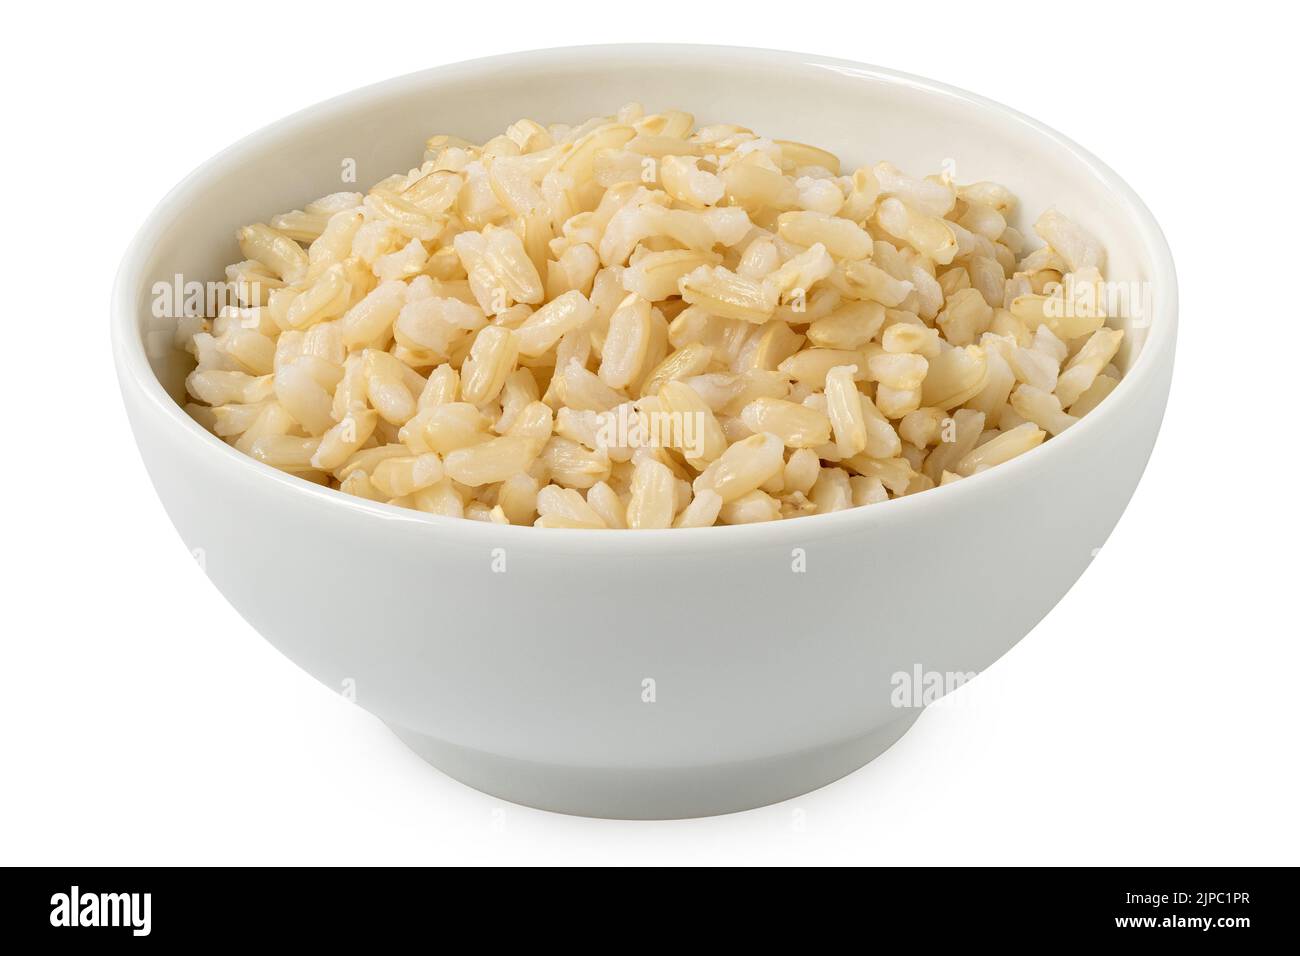 Brown cooked rice in a white ceramic bowl isolated on white. Stock Photo